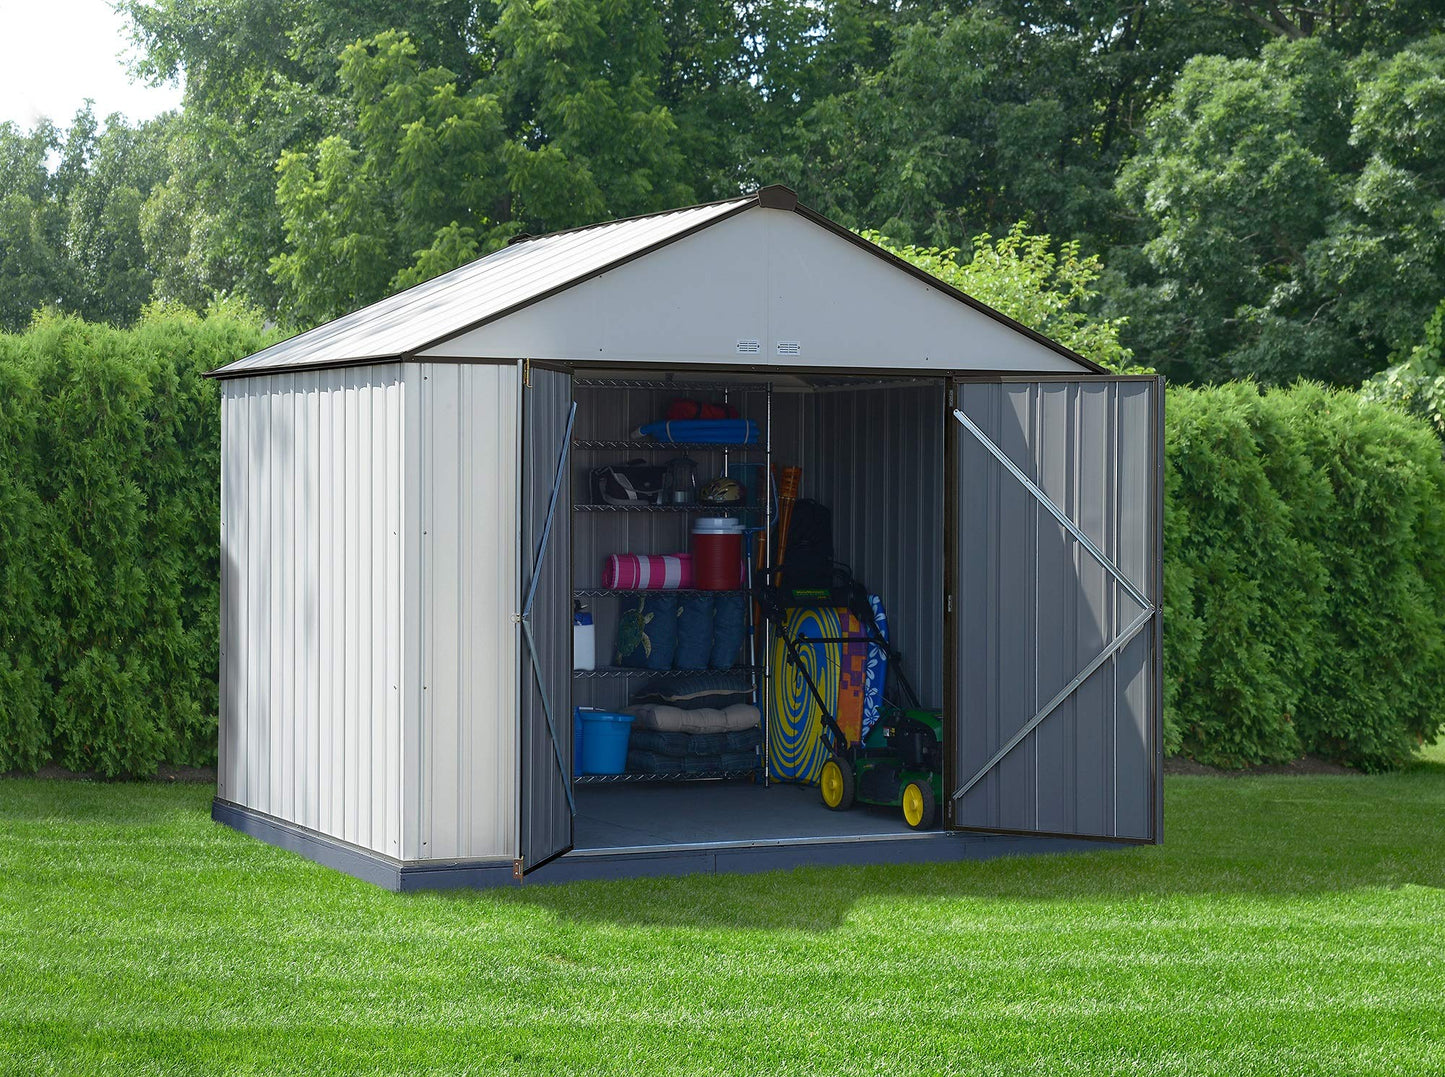 Arrow 10' x 8' EZEE Shed Cream with Charcoal Trim Extra High Gable Steel Storage Shed Cream/Charcoal Trim